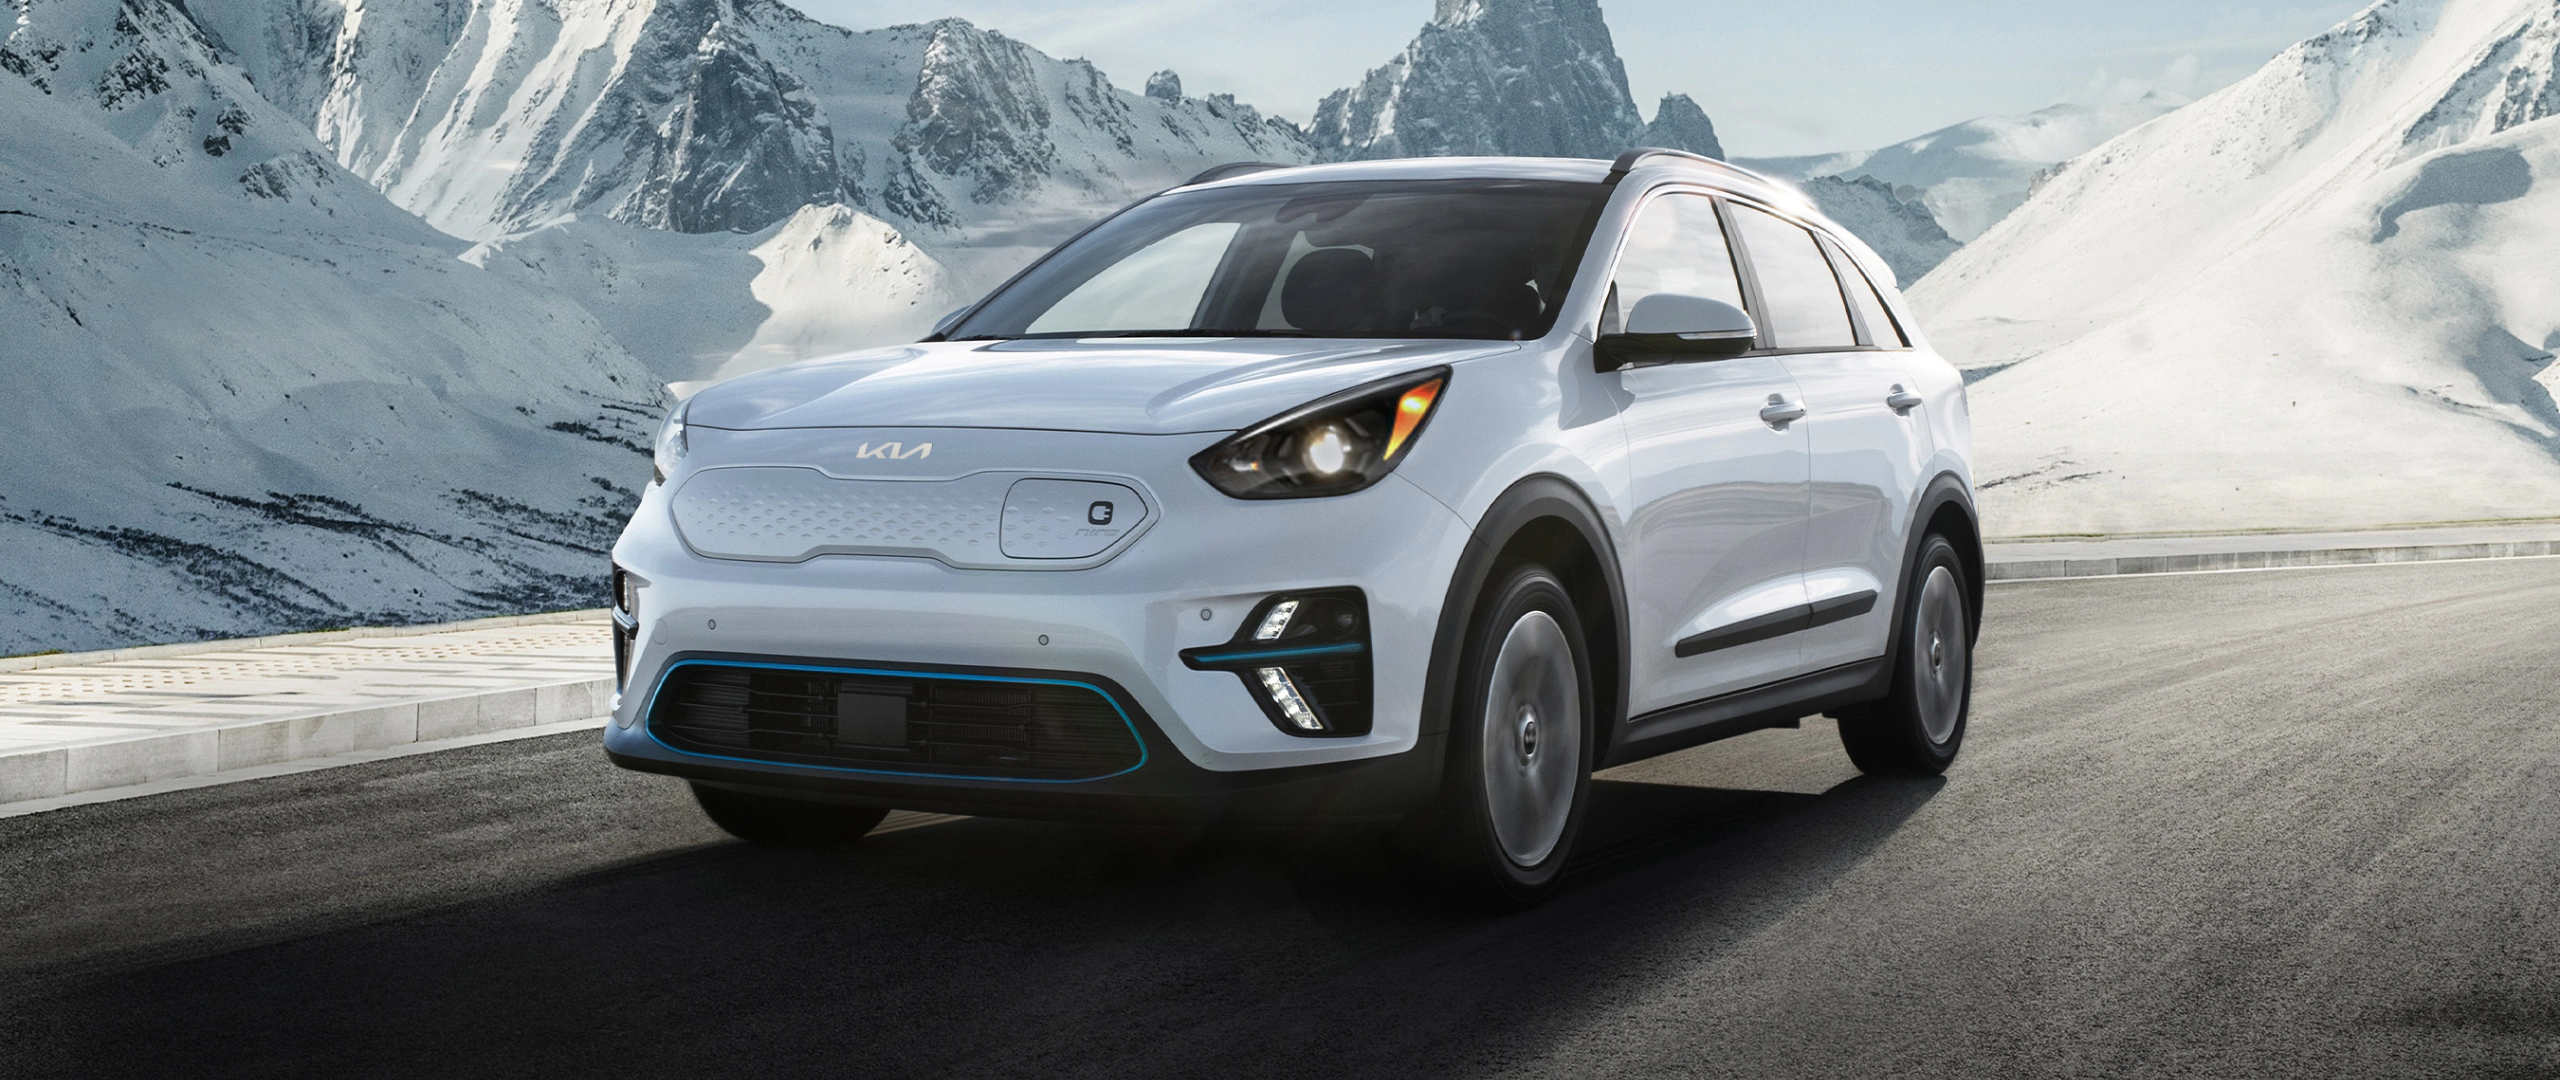 2022 Kia Niro EV available cold weather package